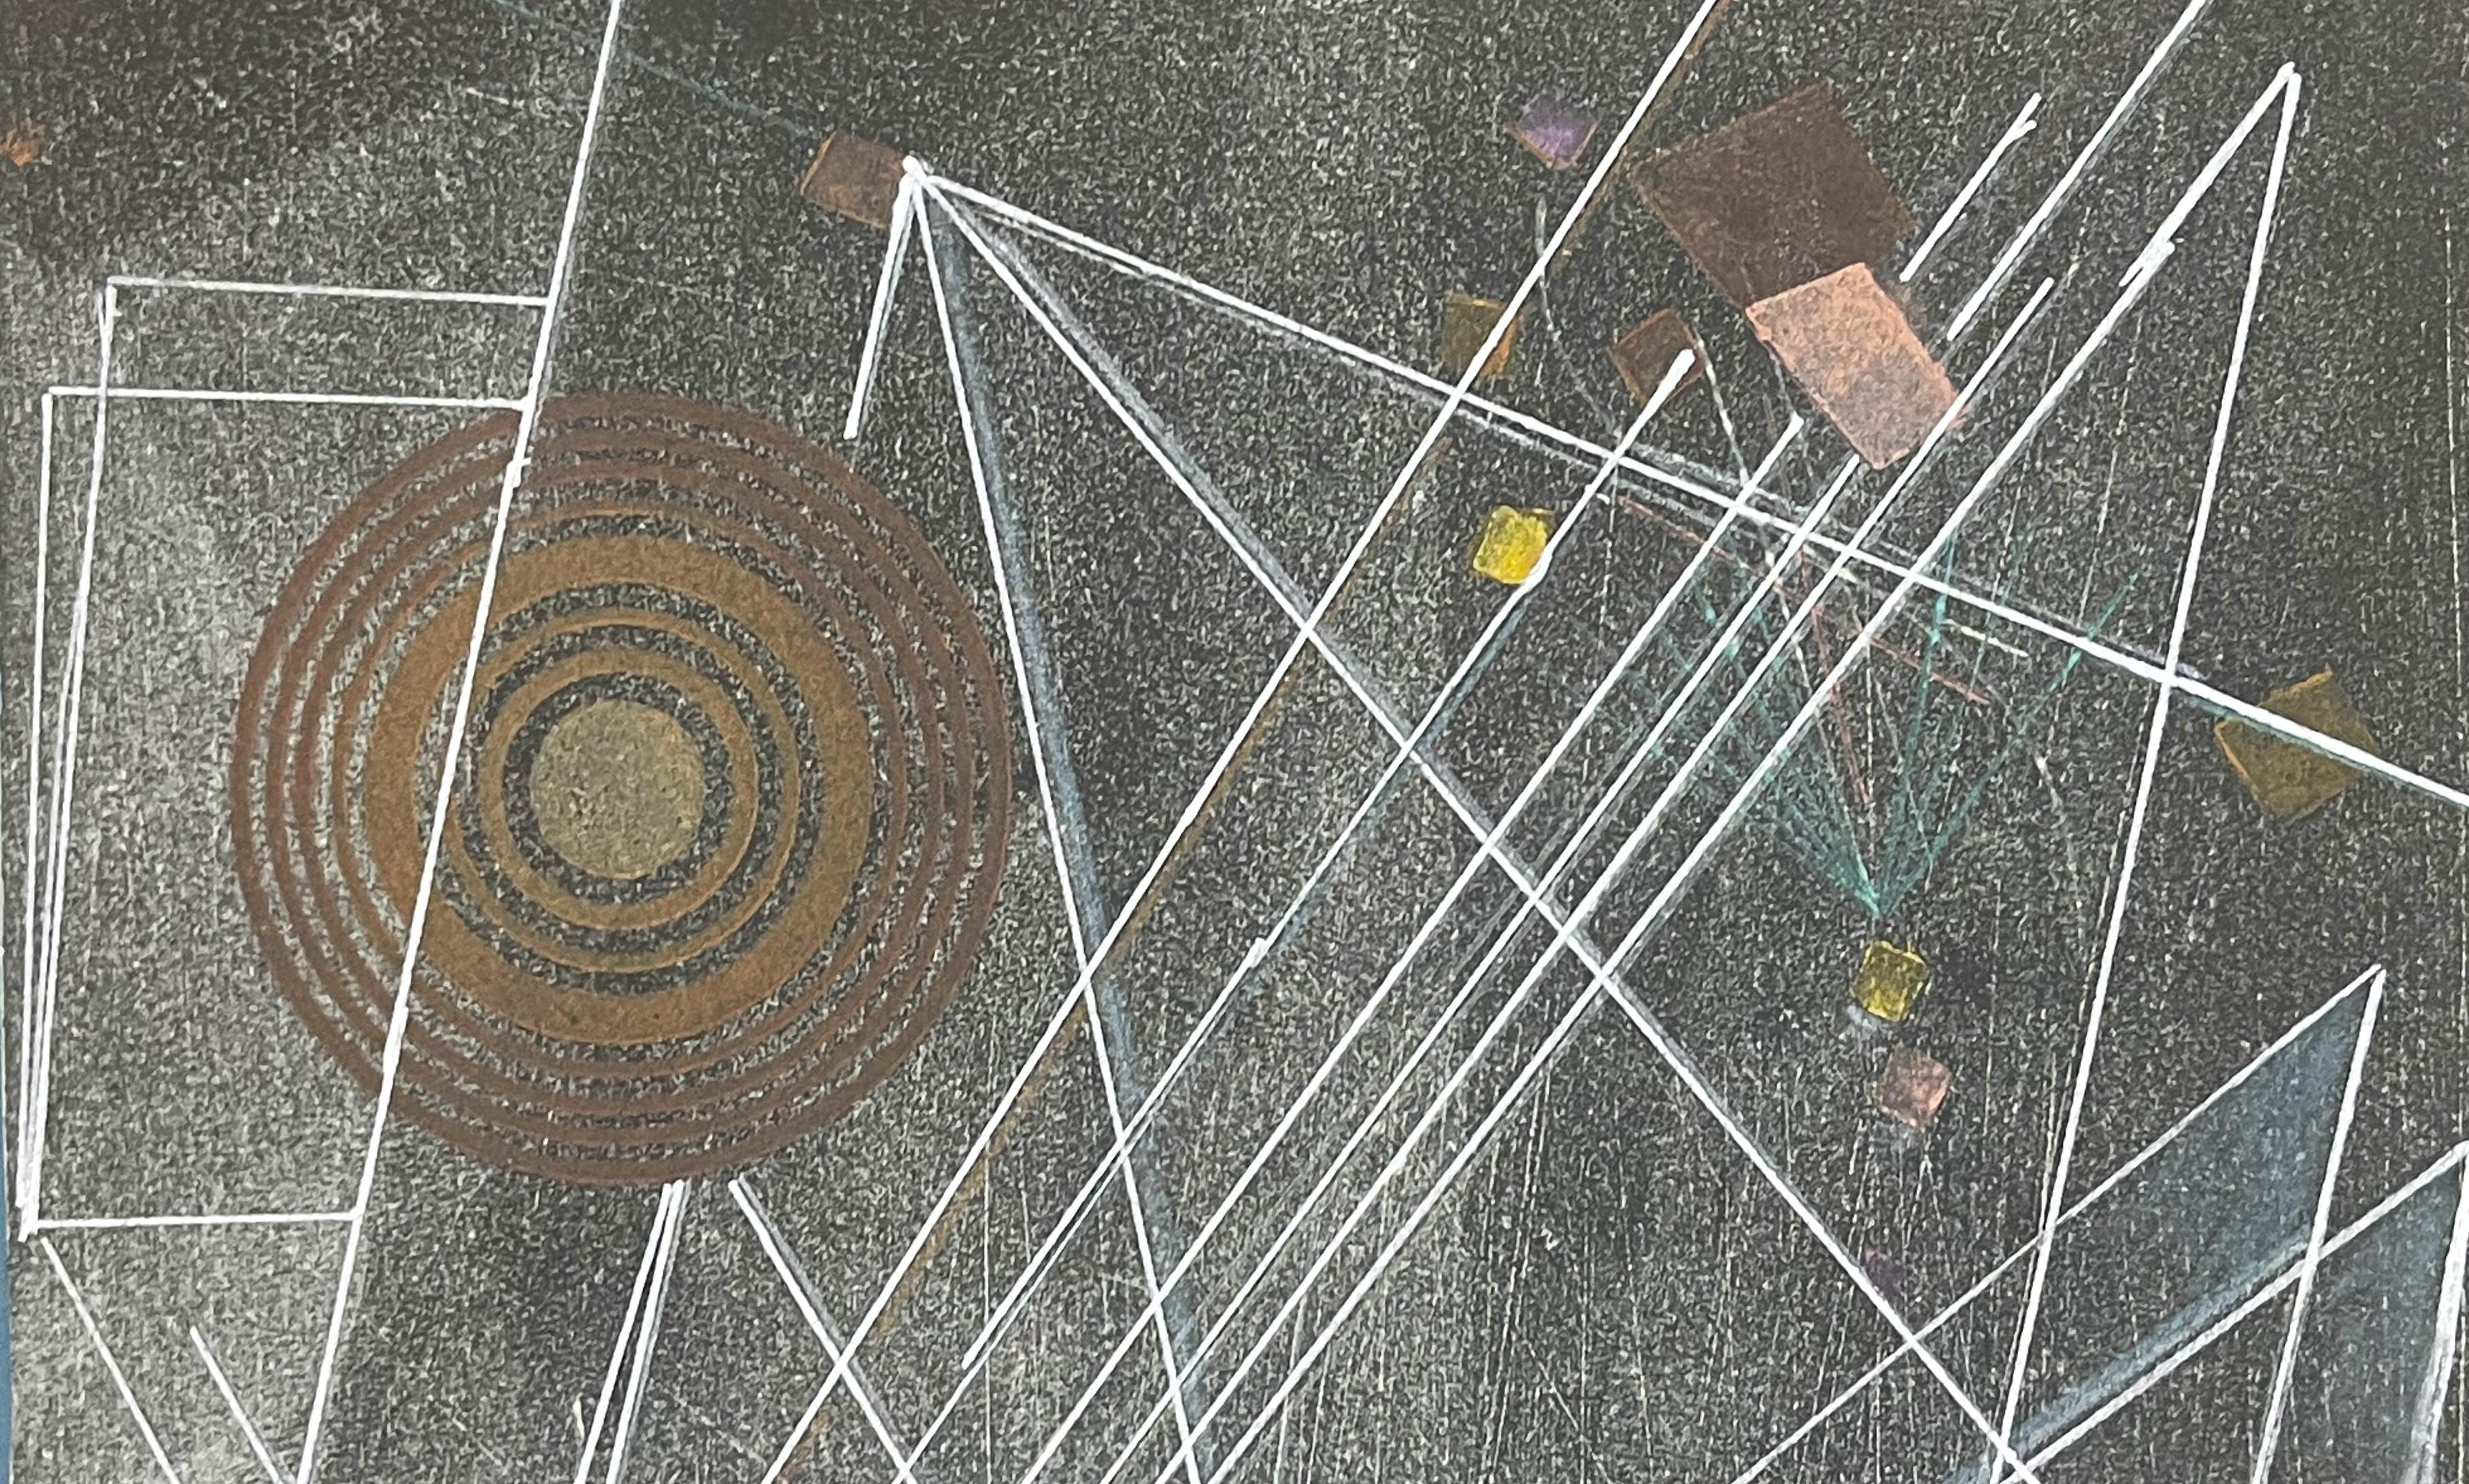 Untitled Geometric - Painting by Rolph Scarlett